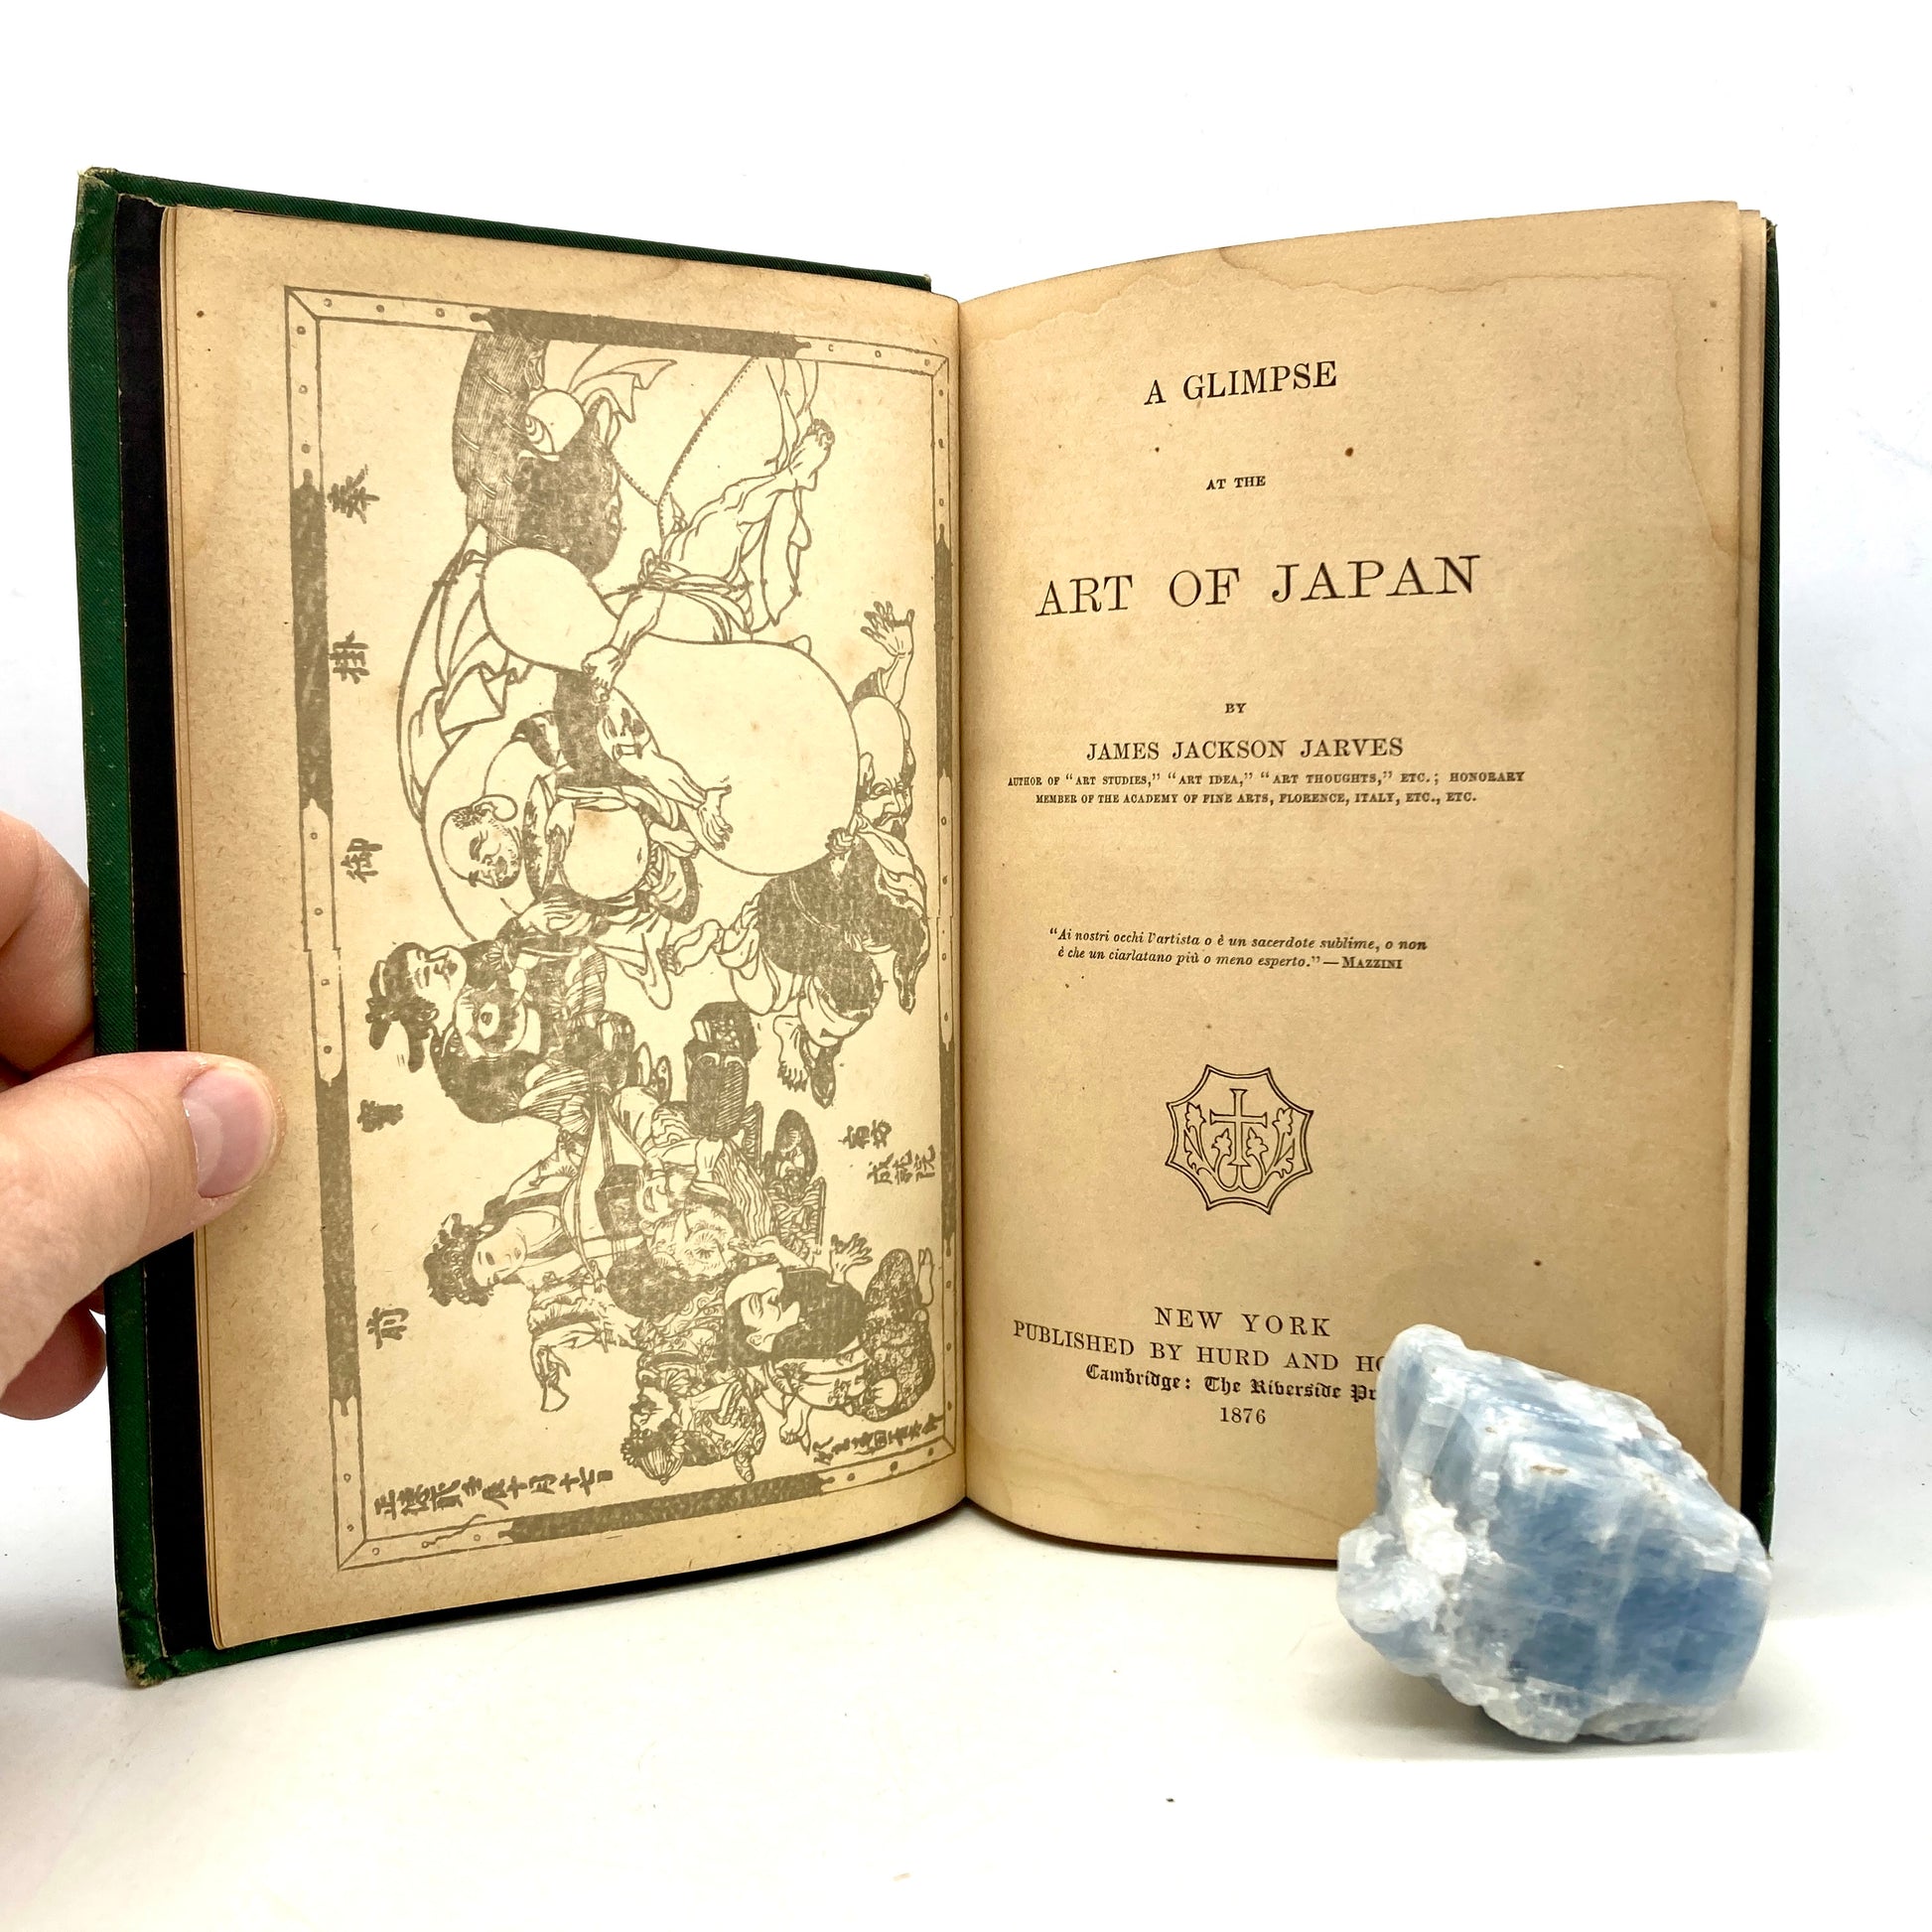 JARVES, James Jackson "A Glimpse at the Art of Japan" [Hurd & Houghton, 1876] - Buzz Bookstore